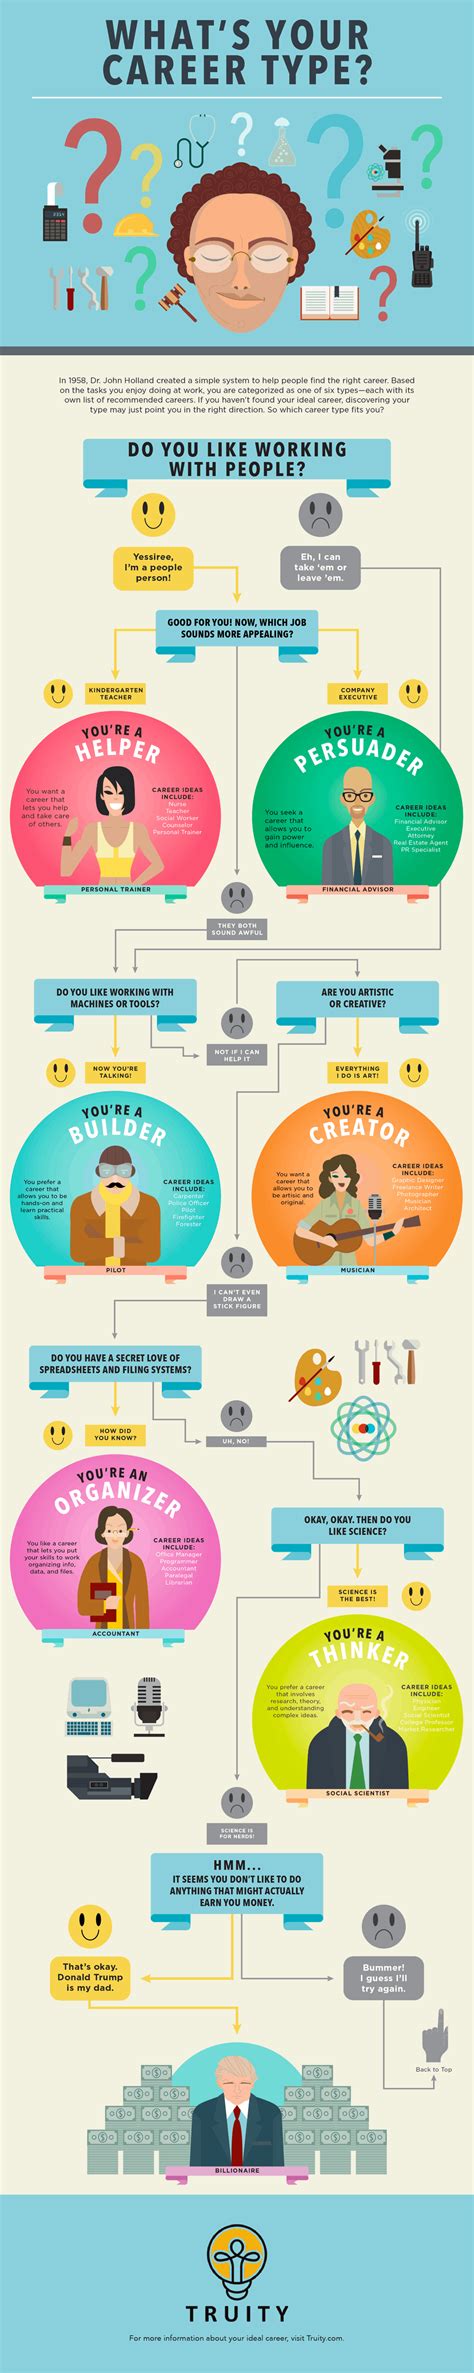 Whats Your Career Type Daily Infographic